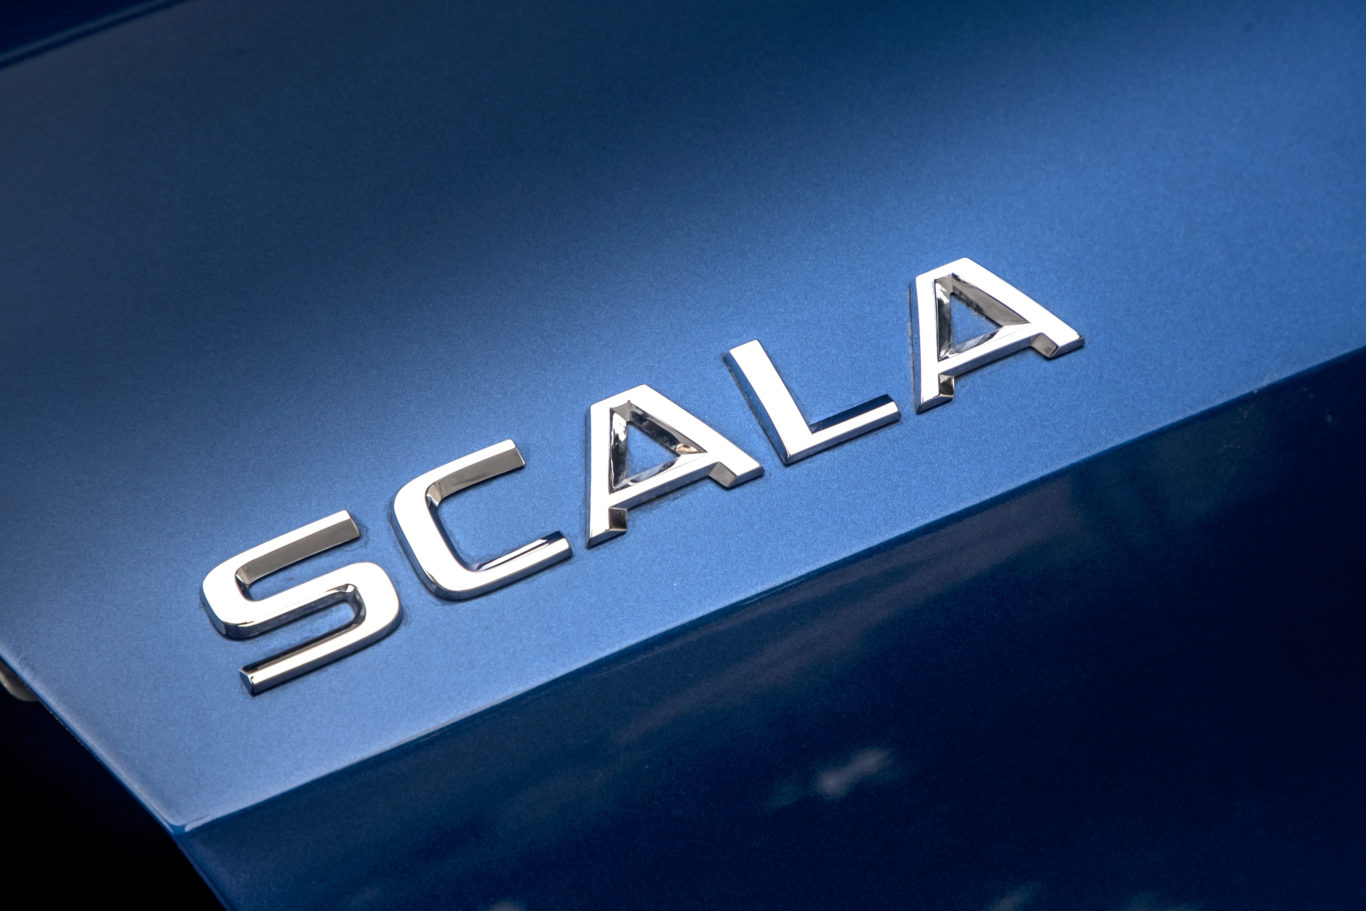 The Scala hasn't been created to replace the Rapid